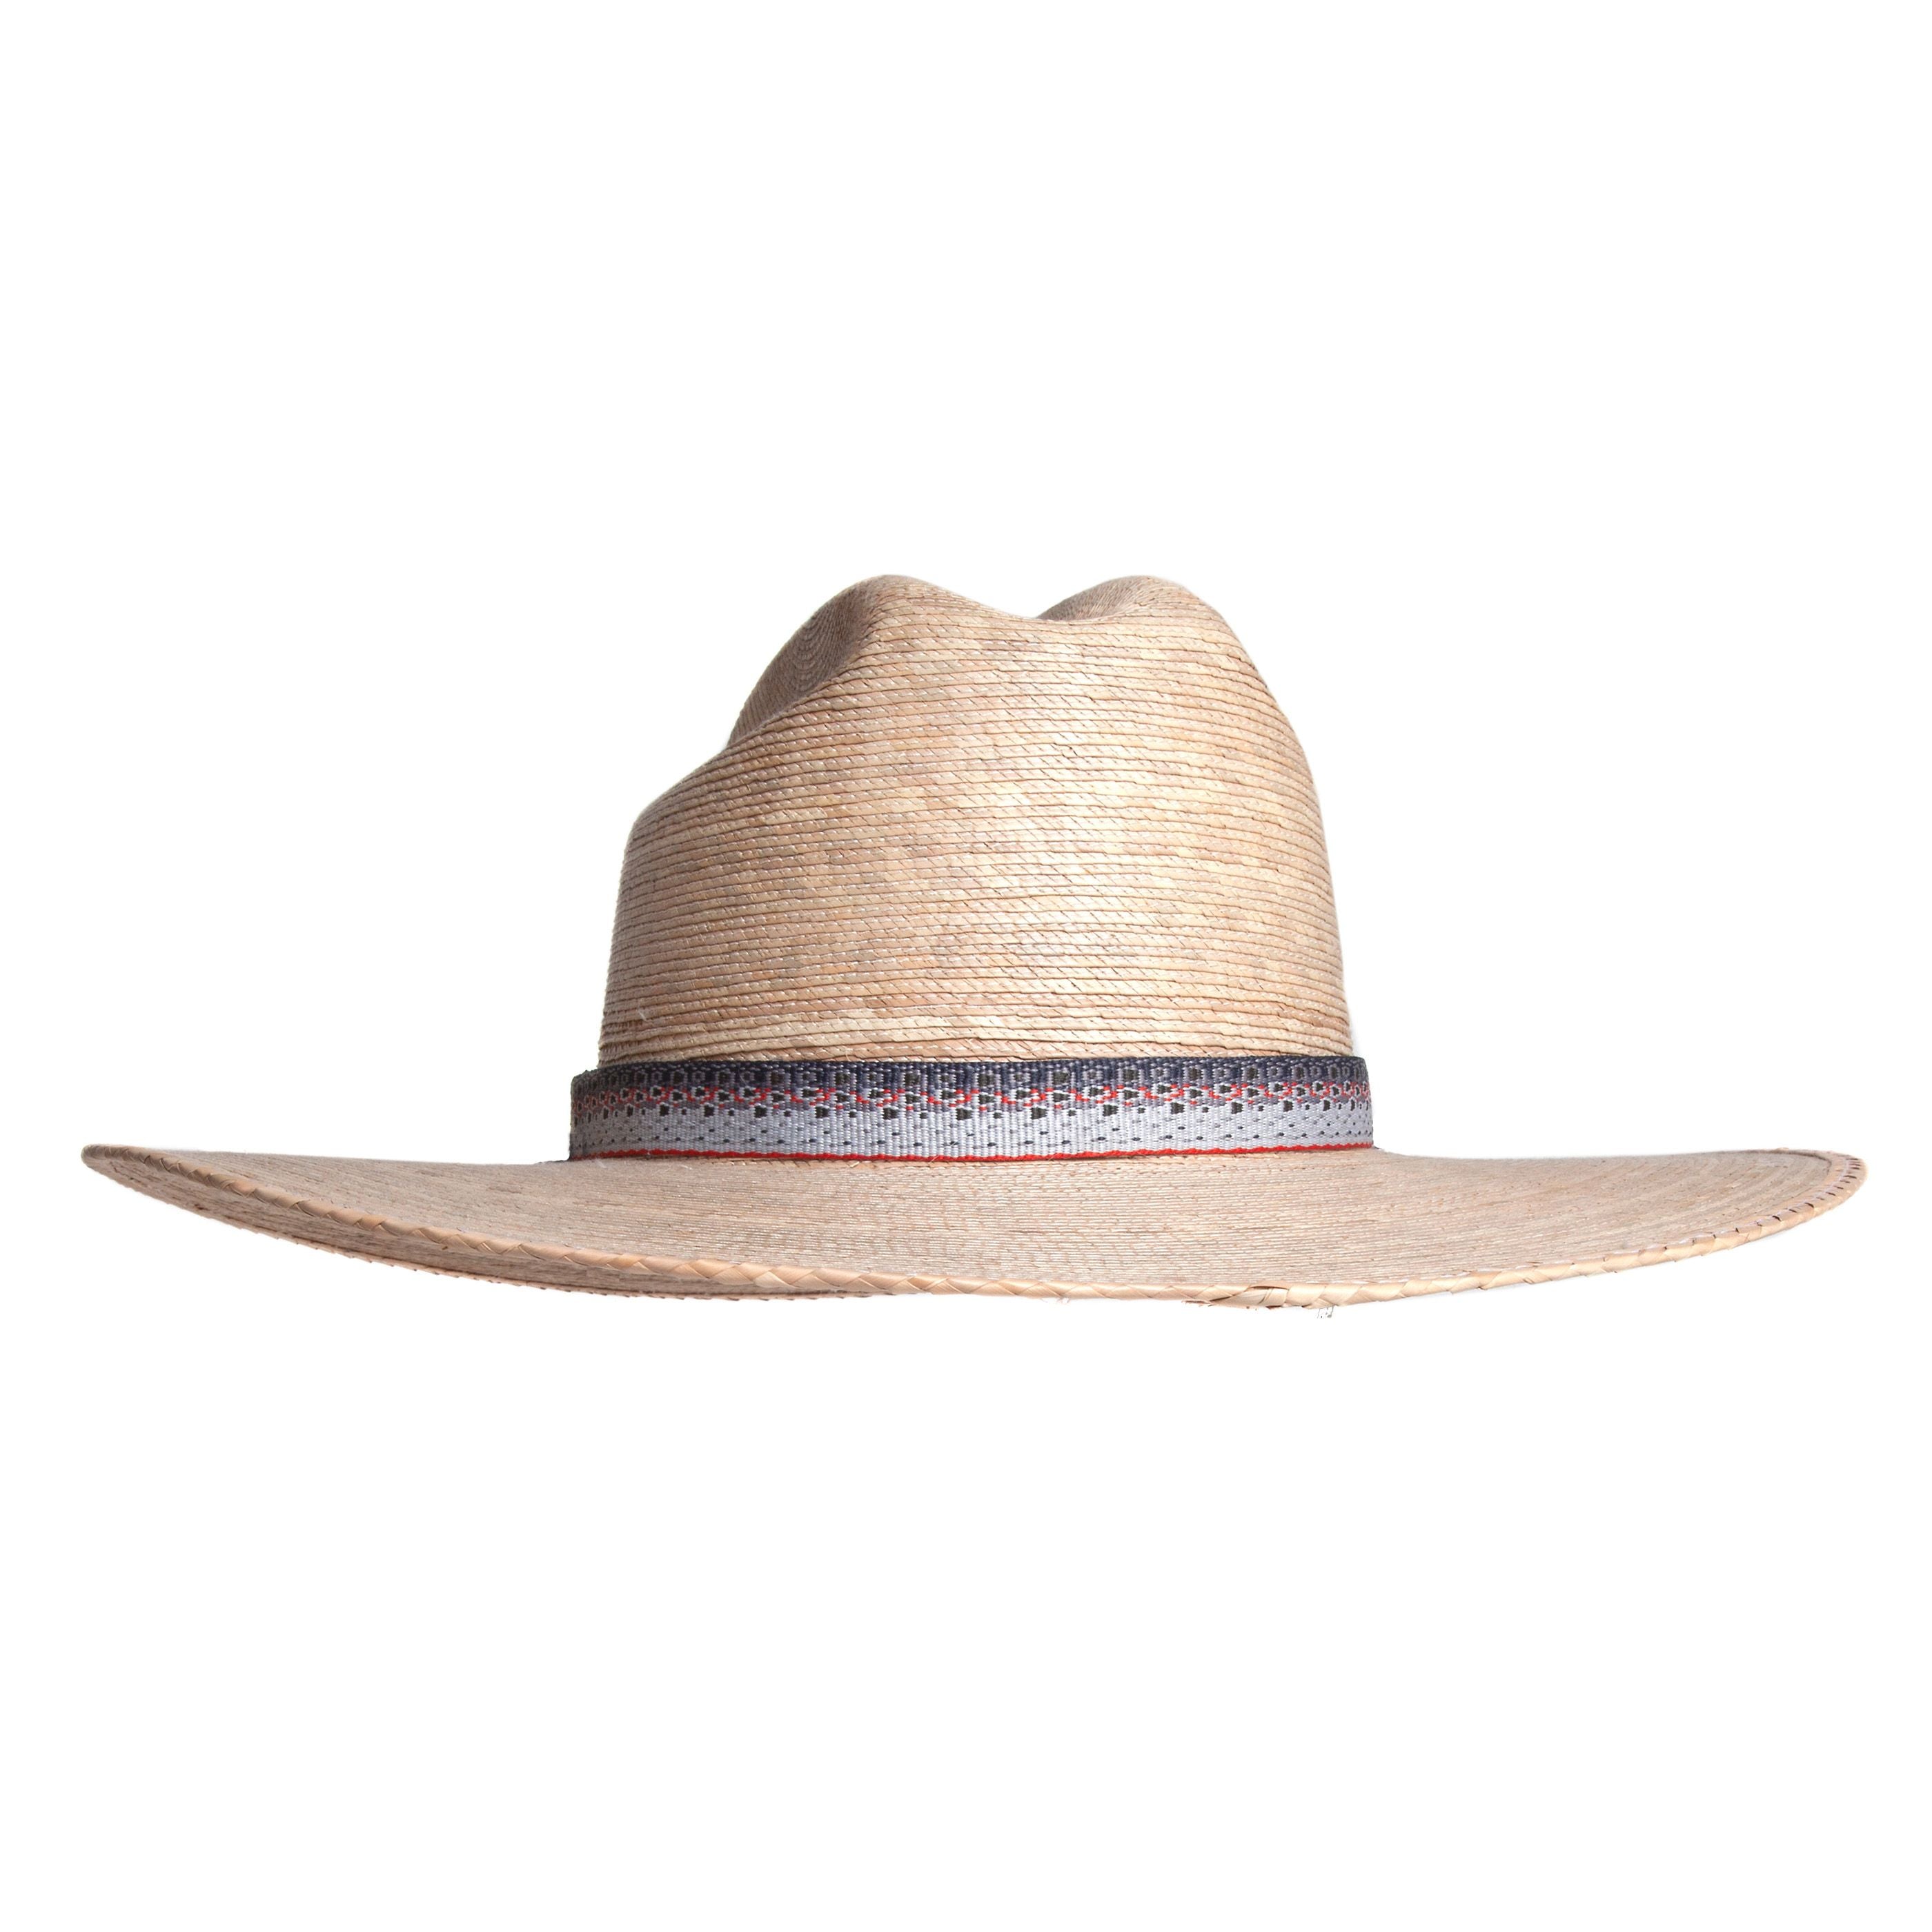 FishPond Fly Fishing - Lowcountry Palm Straw Western Hat